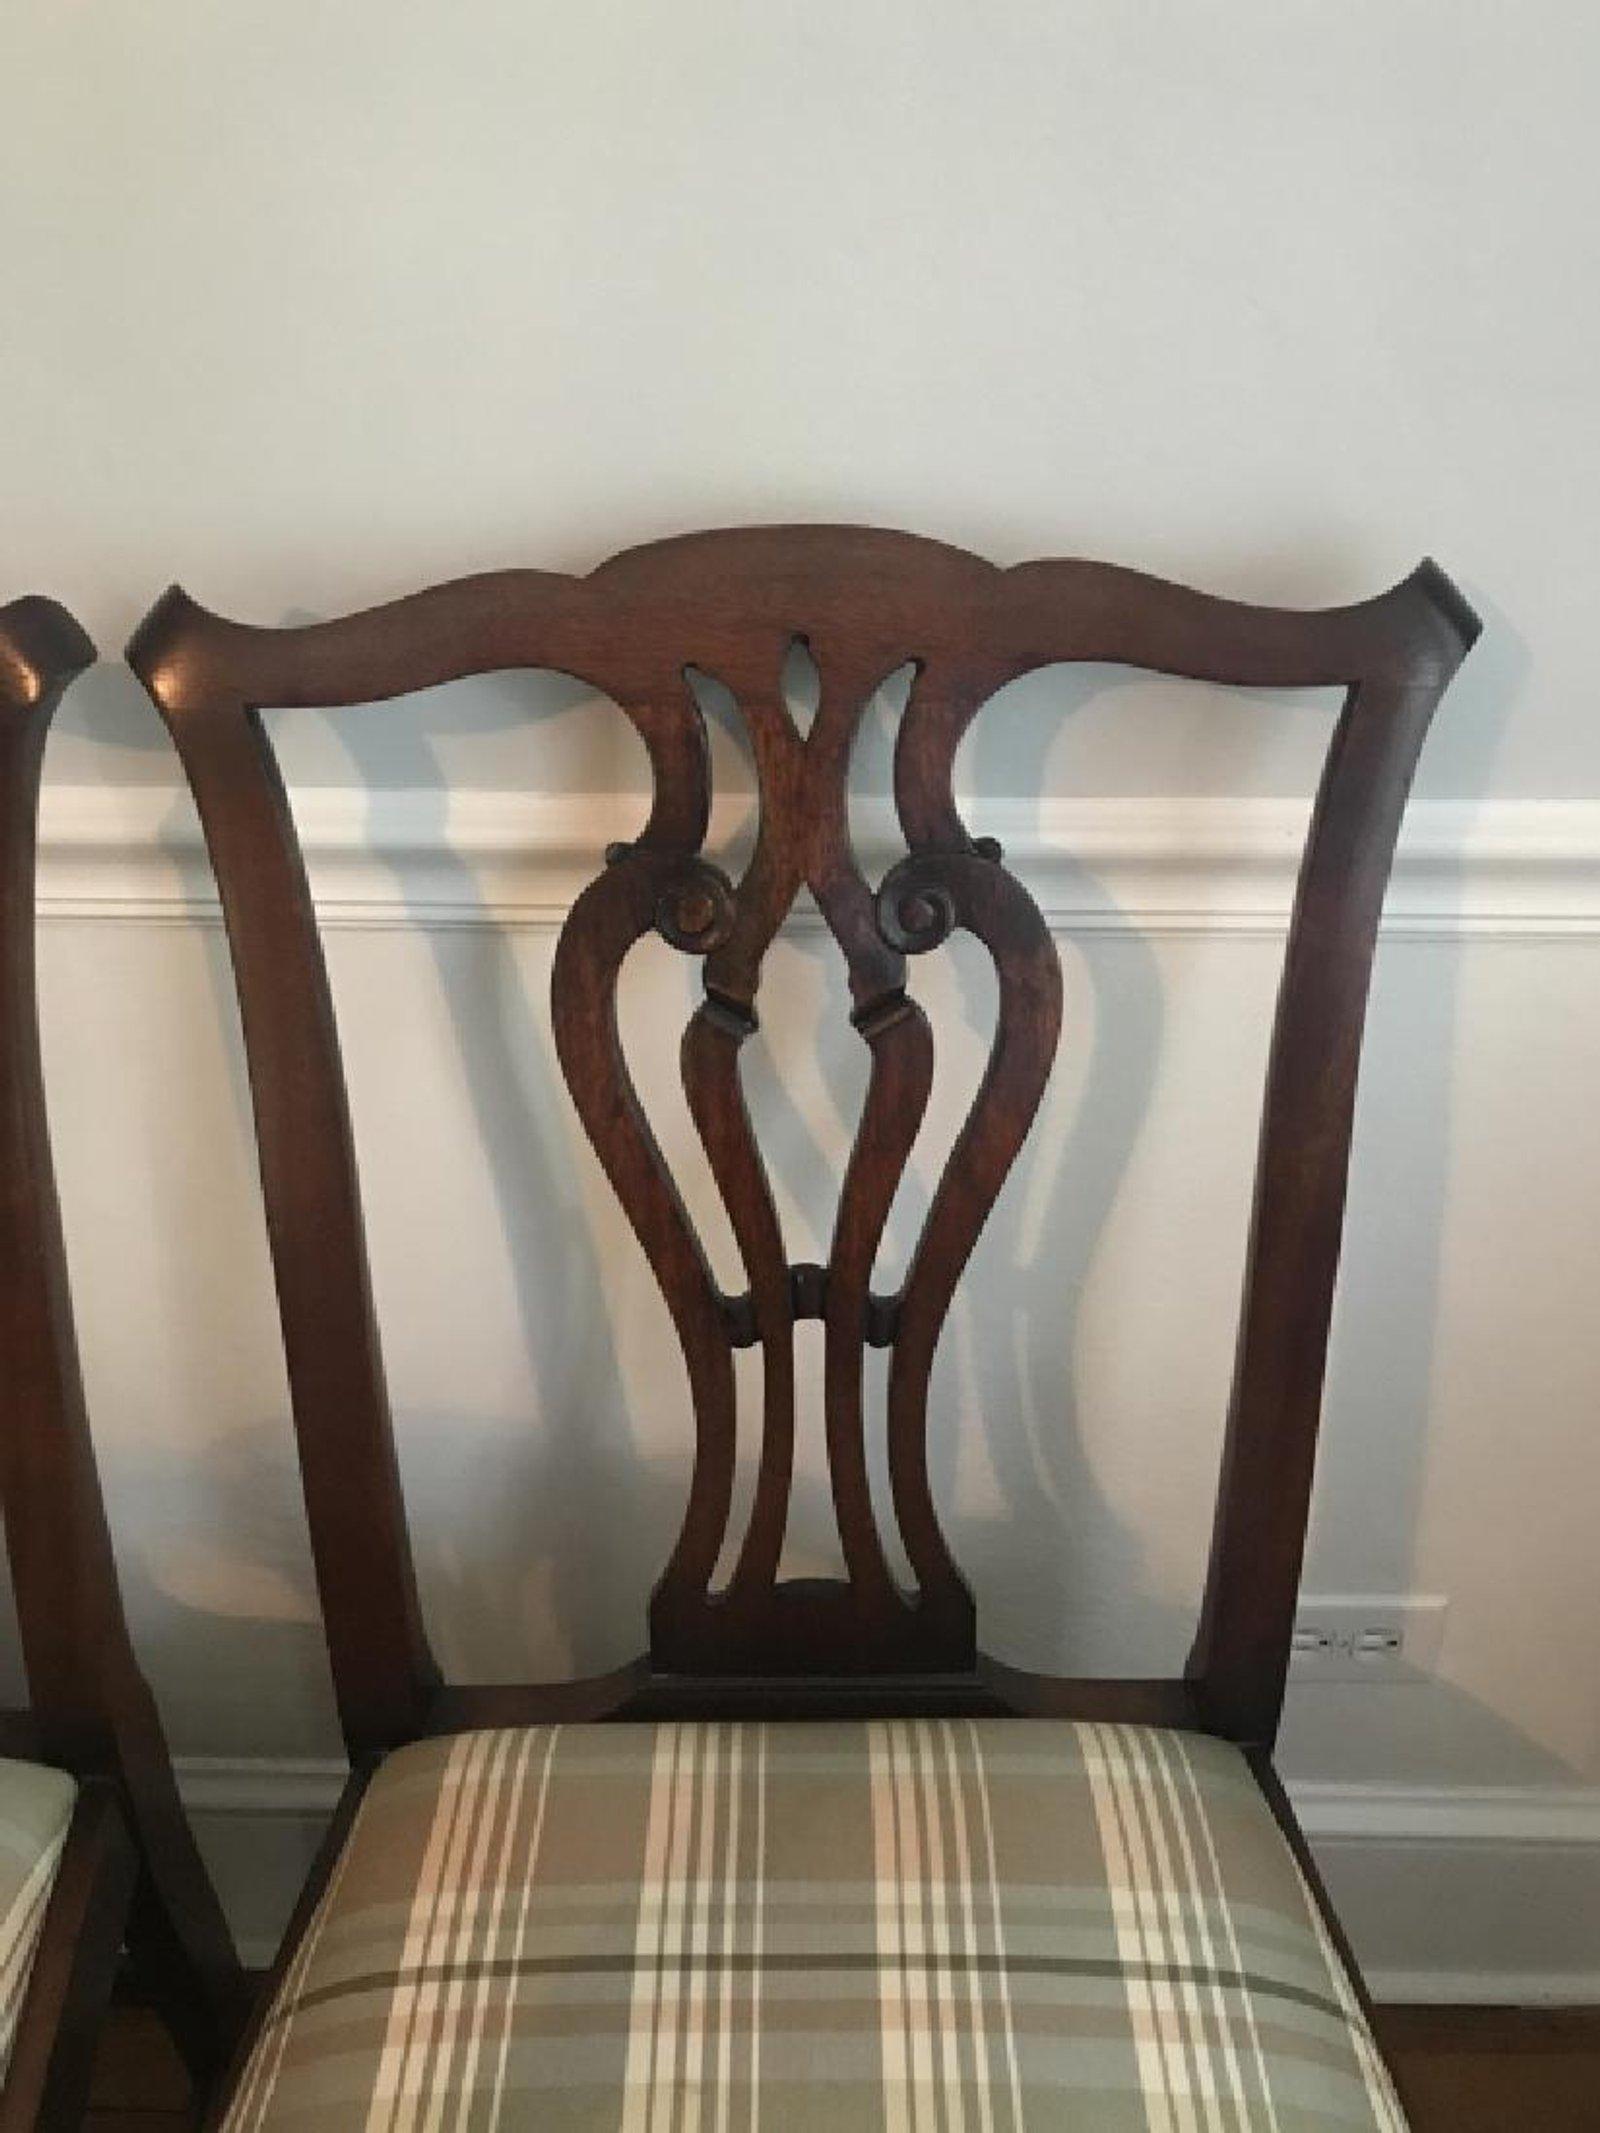 Beautiful set of simple, Chippendale dining chairs by Ardley Hall furniture company of Thomasville, NC. Mid-20th century, sturdy, solid mahogany with removable covered seats. Two arms plus six sides. Very sturdy, beautiful, not too fancy, straight